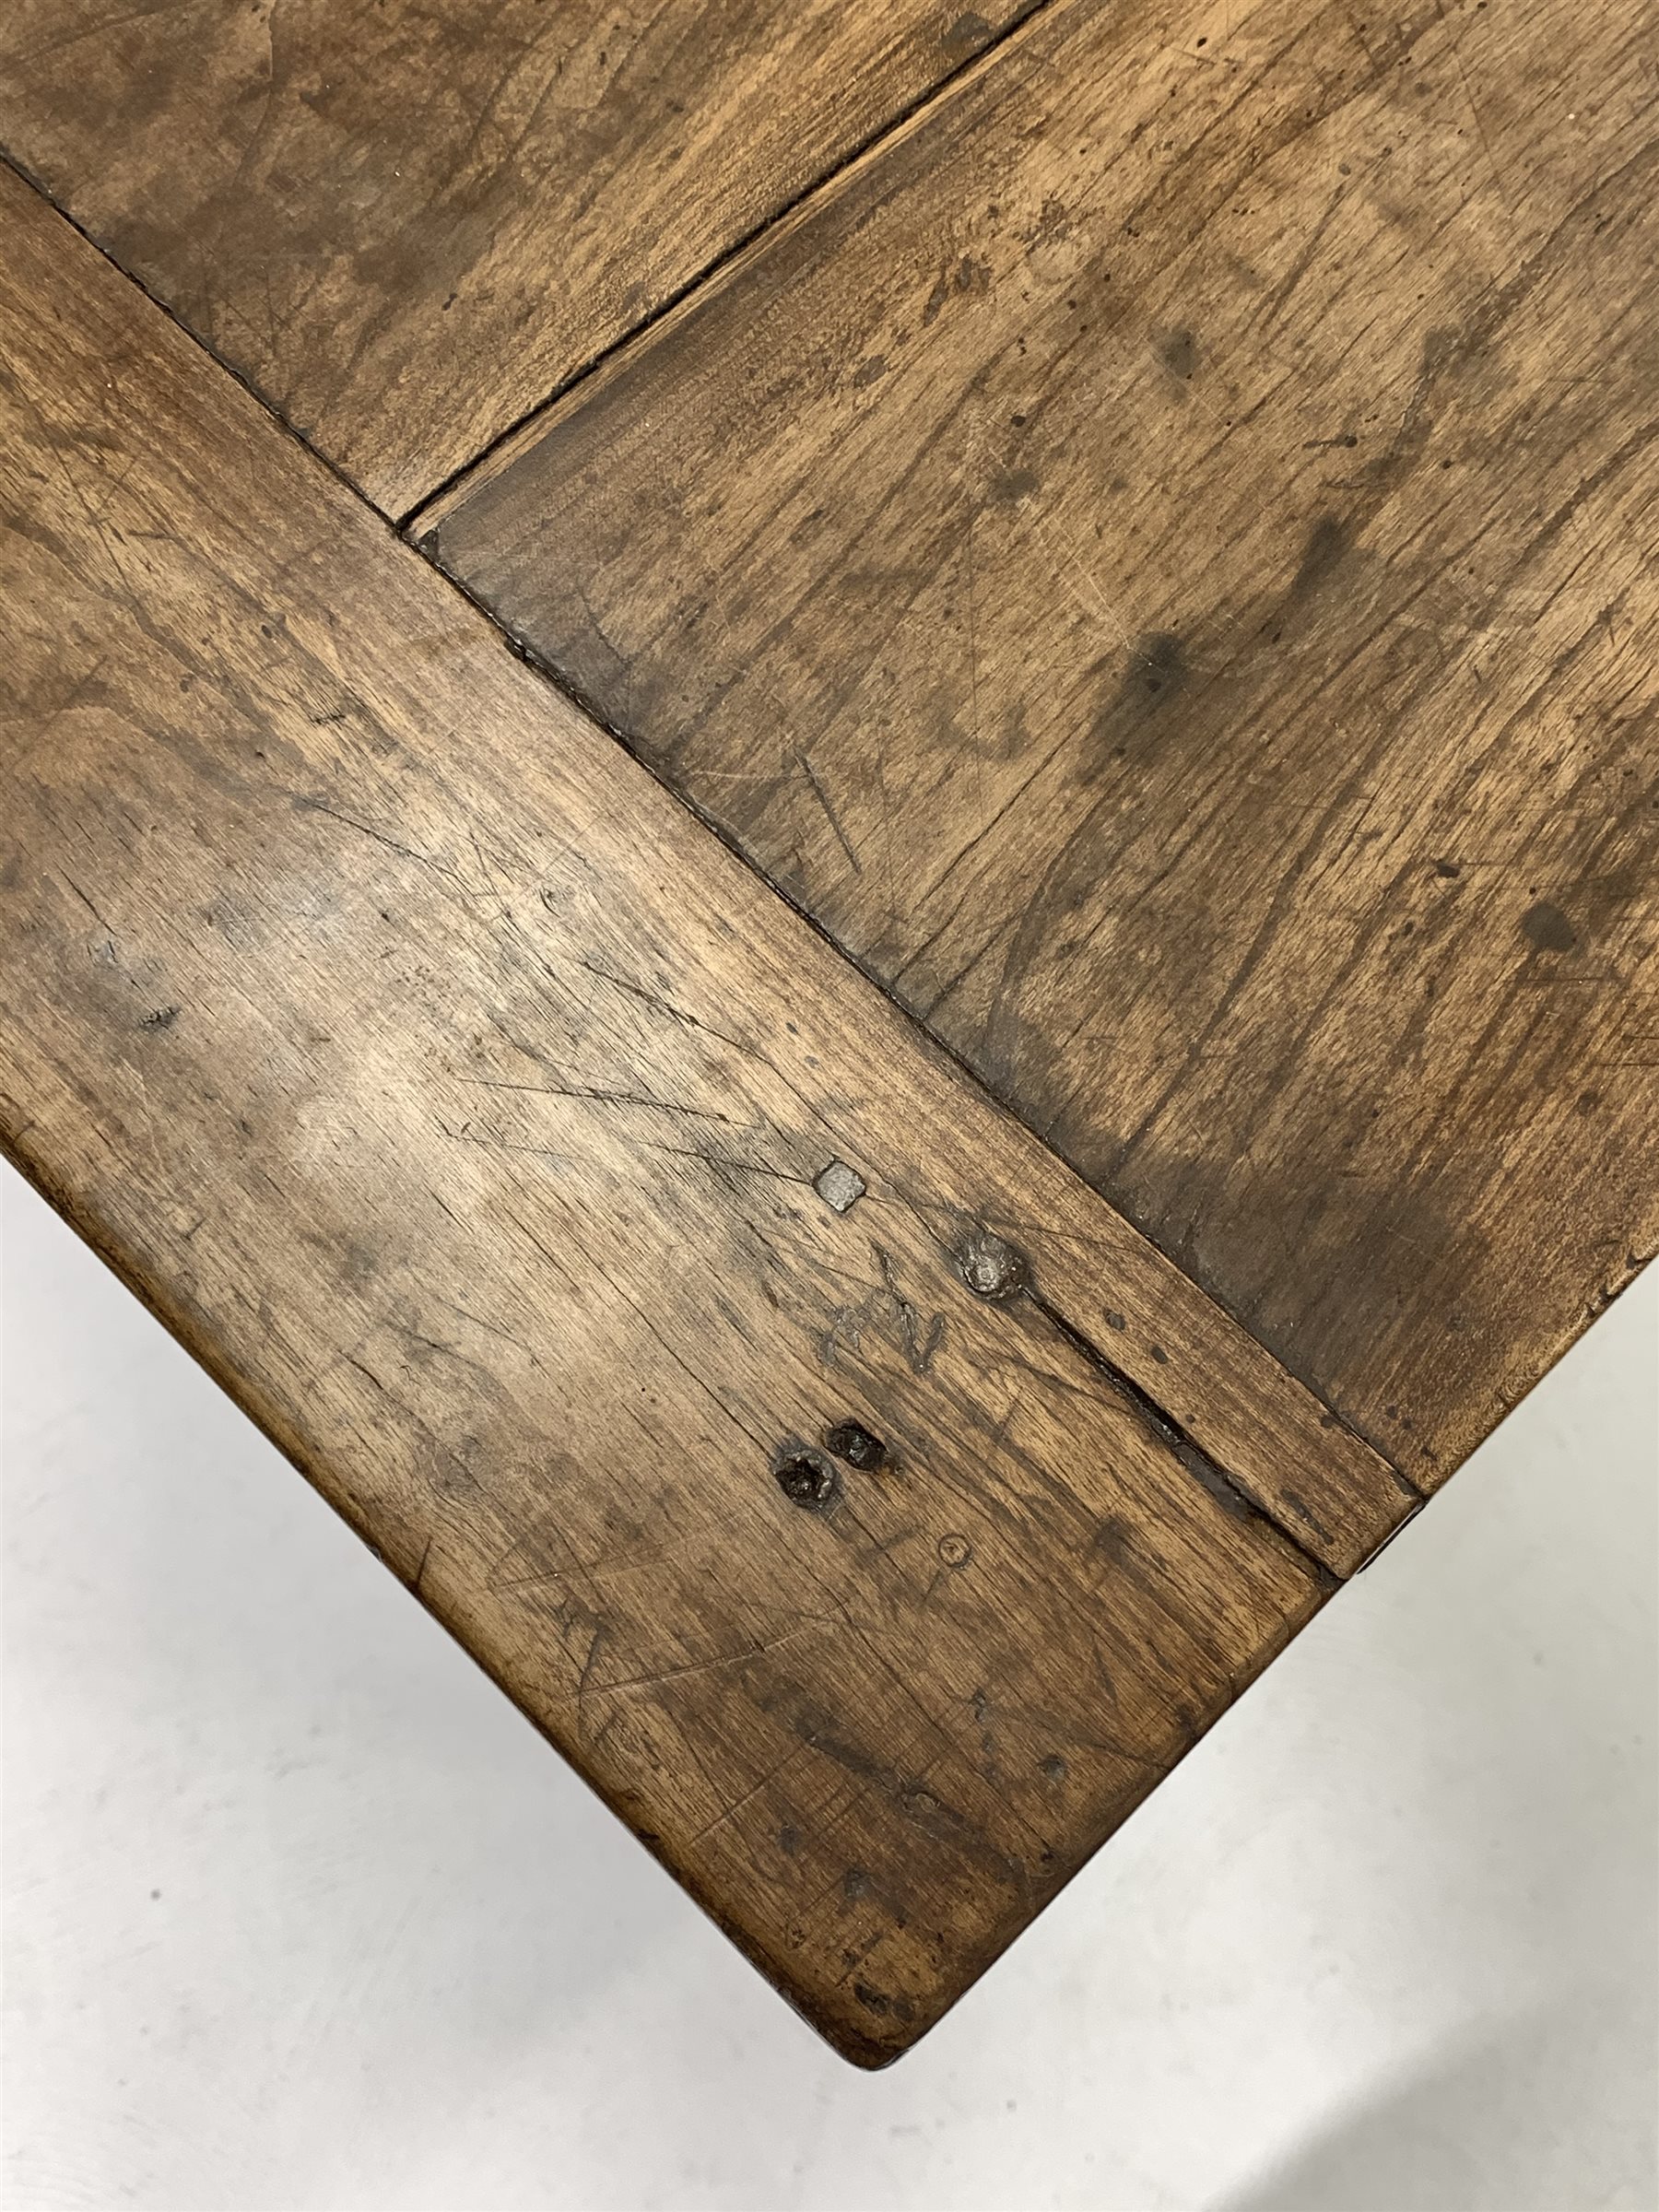 19th century French fruit wood kitchen table, plank top with bread boarded ends, straight supports c - Image 3 of 8